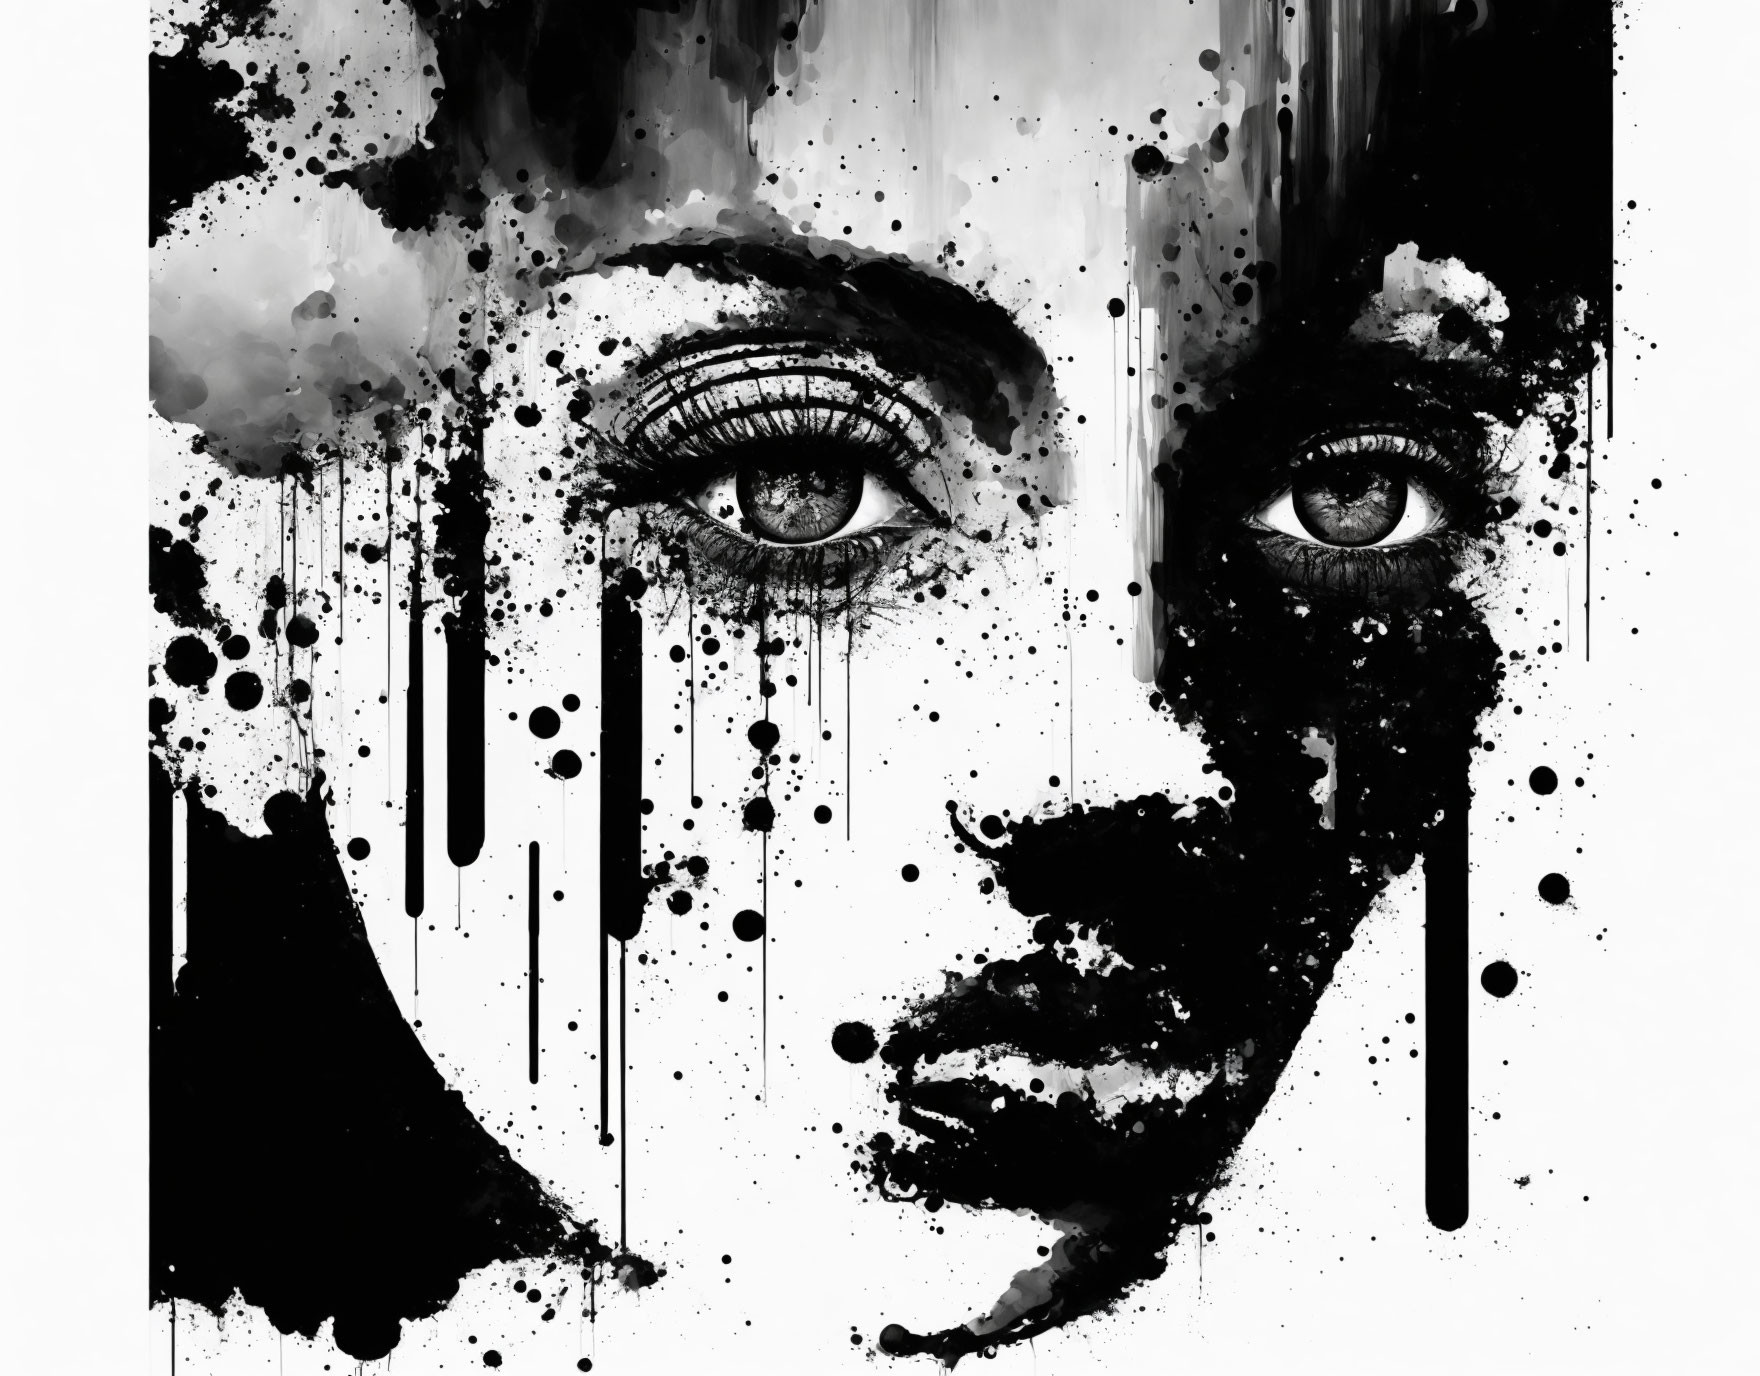 Monochrome abstract artwork: fragmented female face with clear and obscured eye